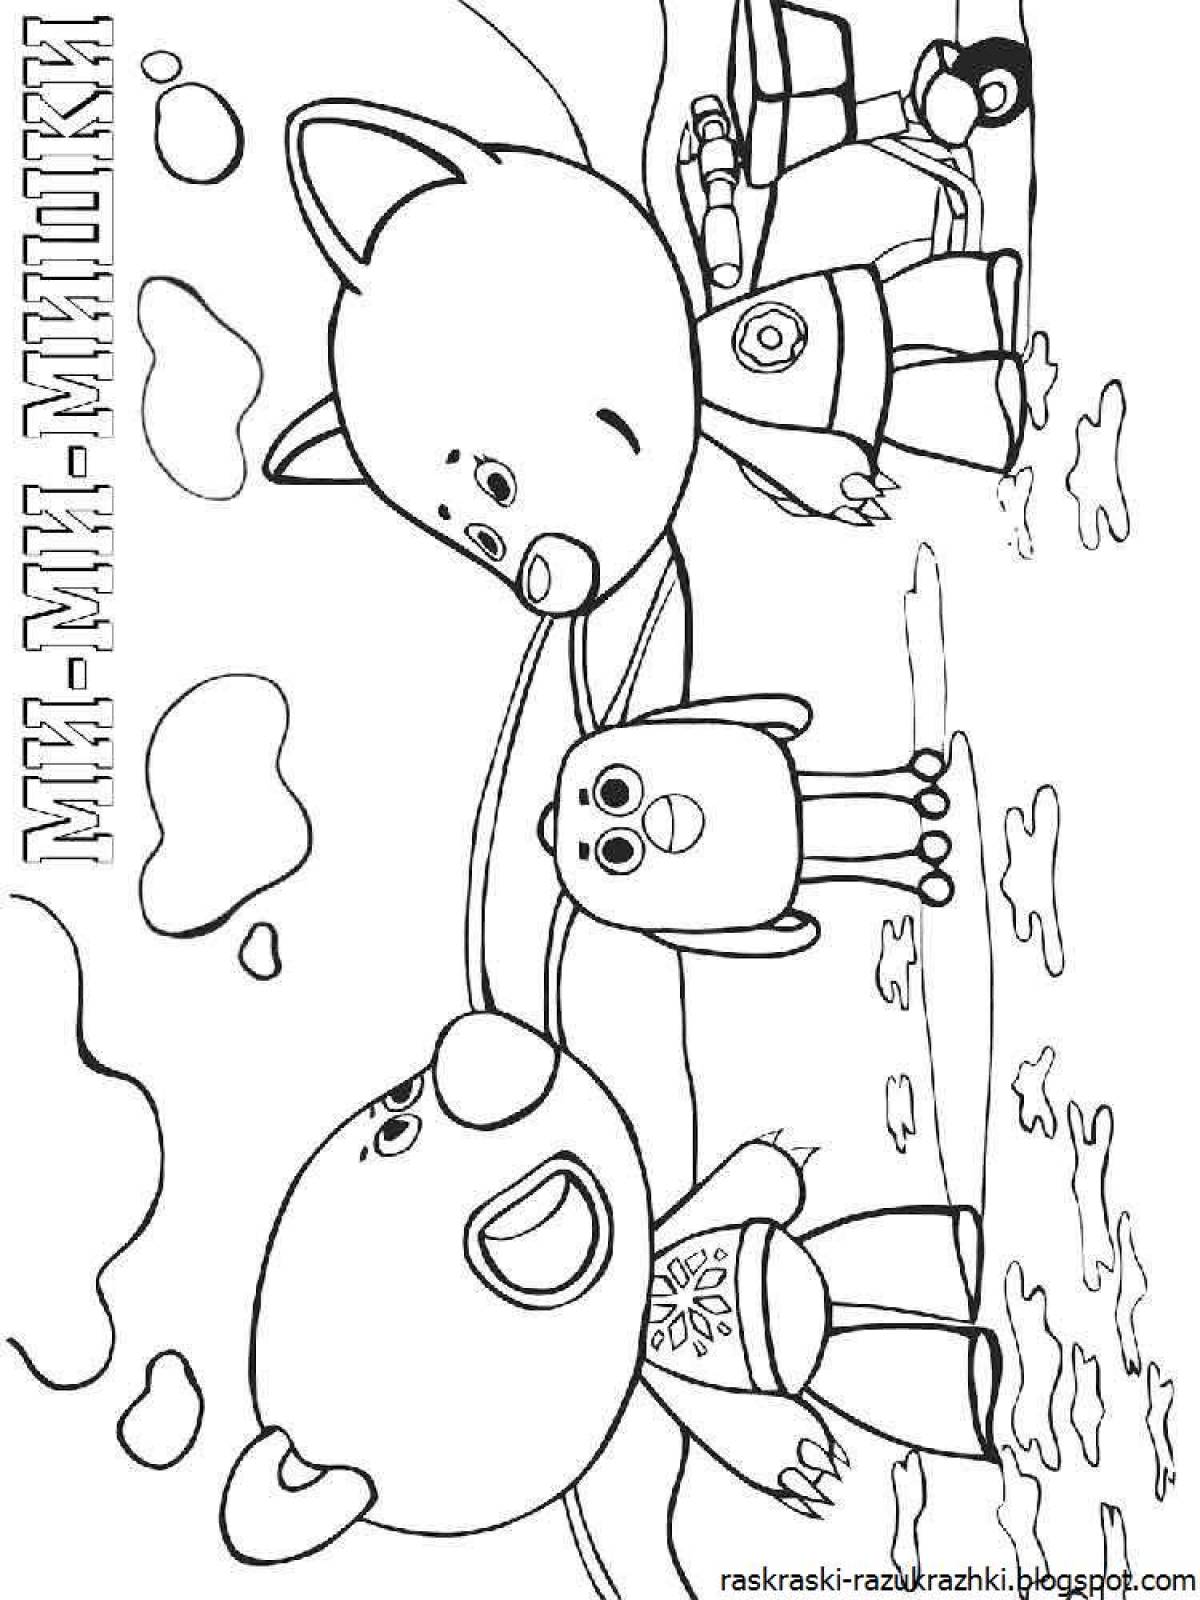 Wagging bears coloring pages